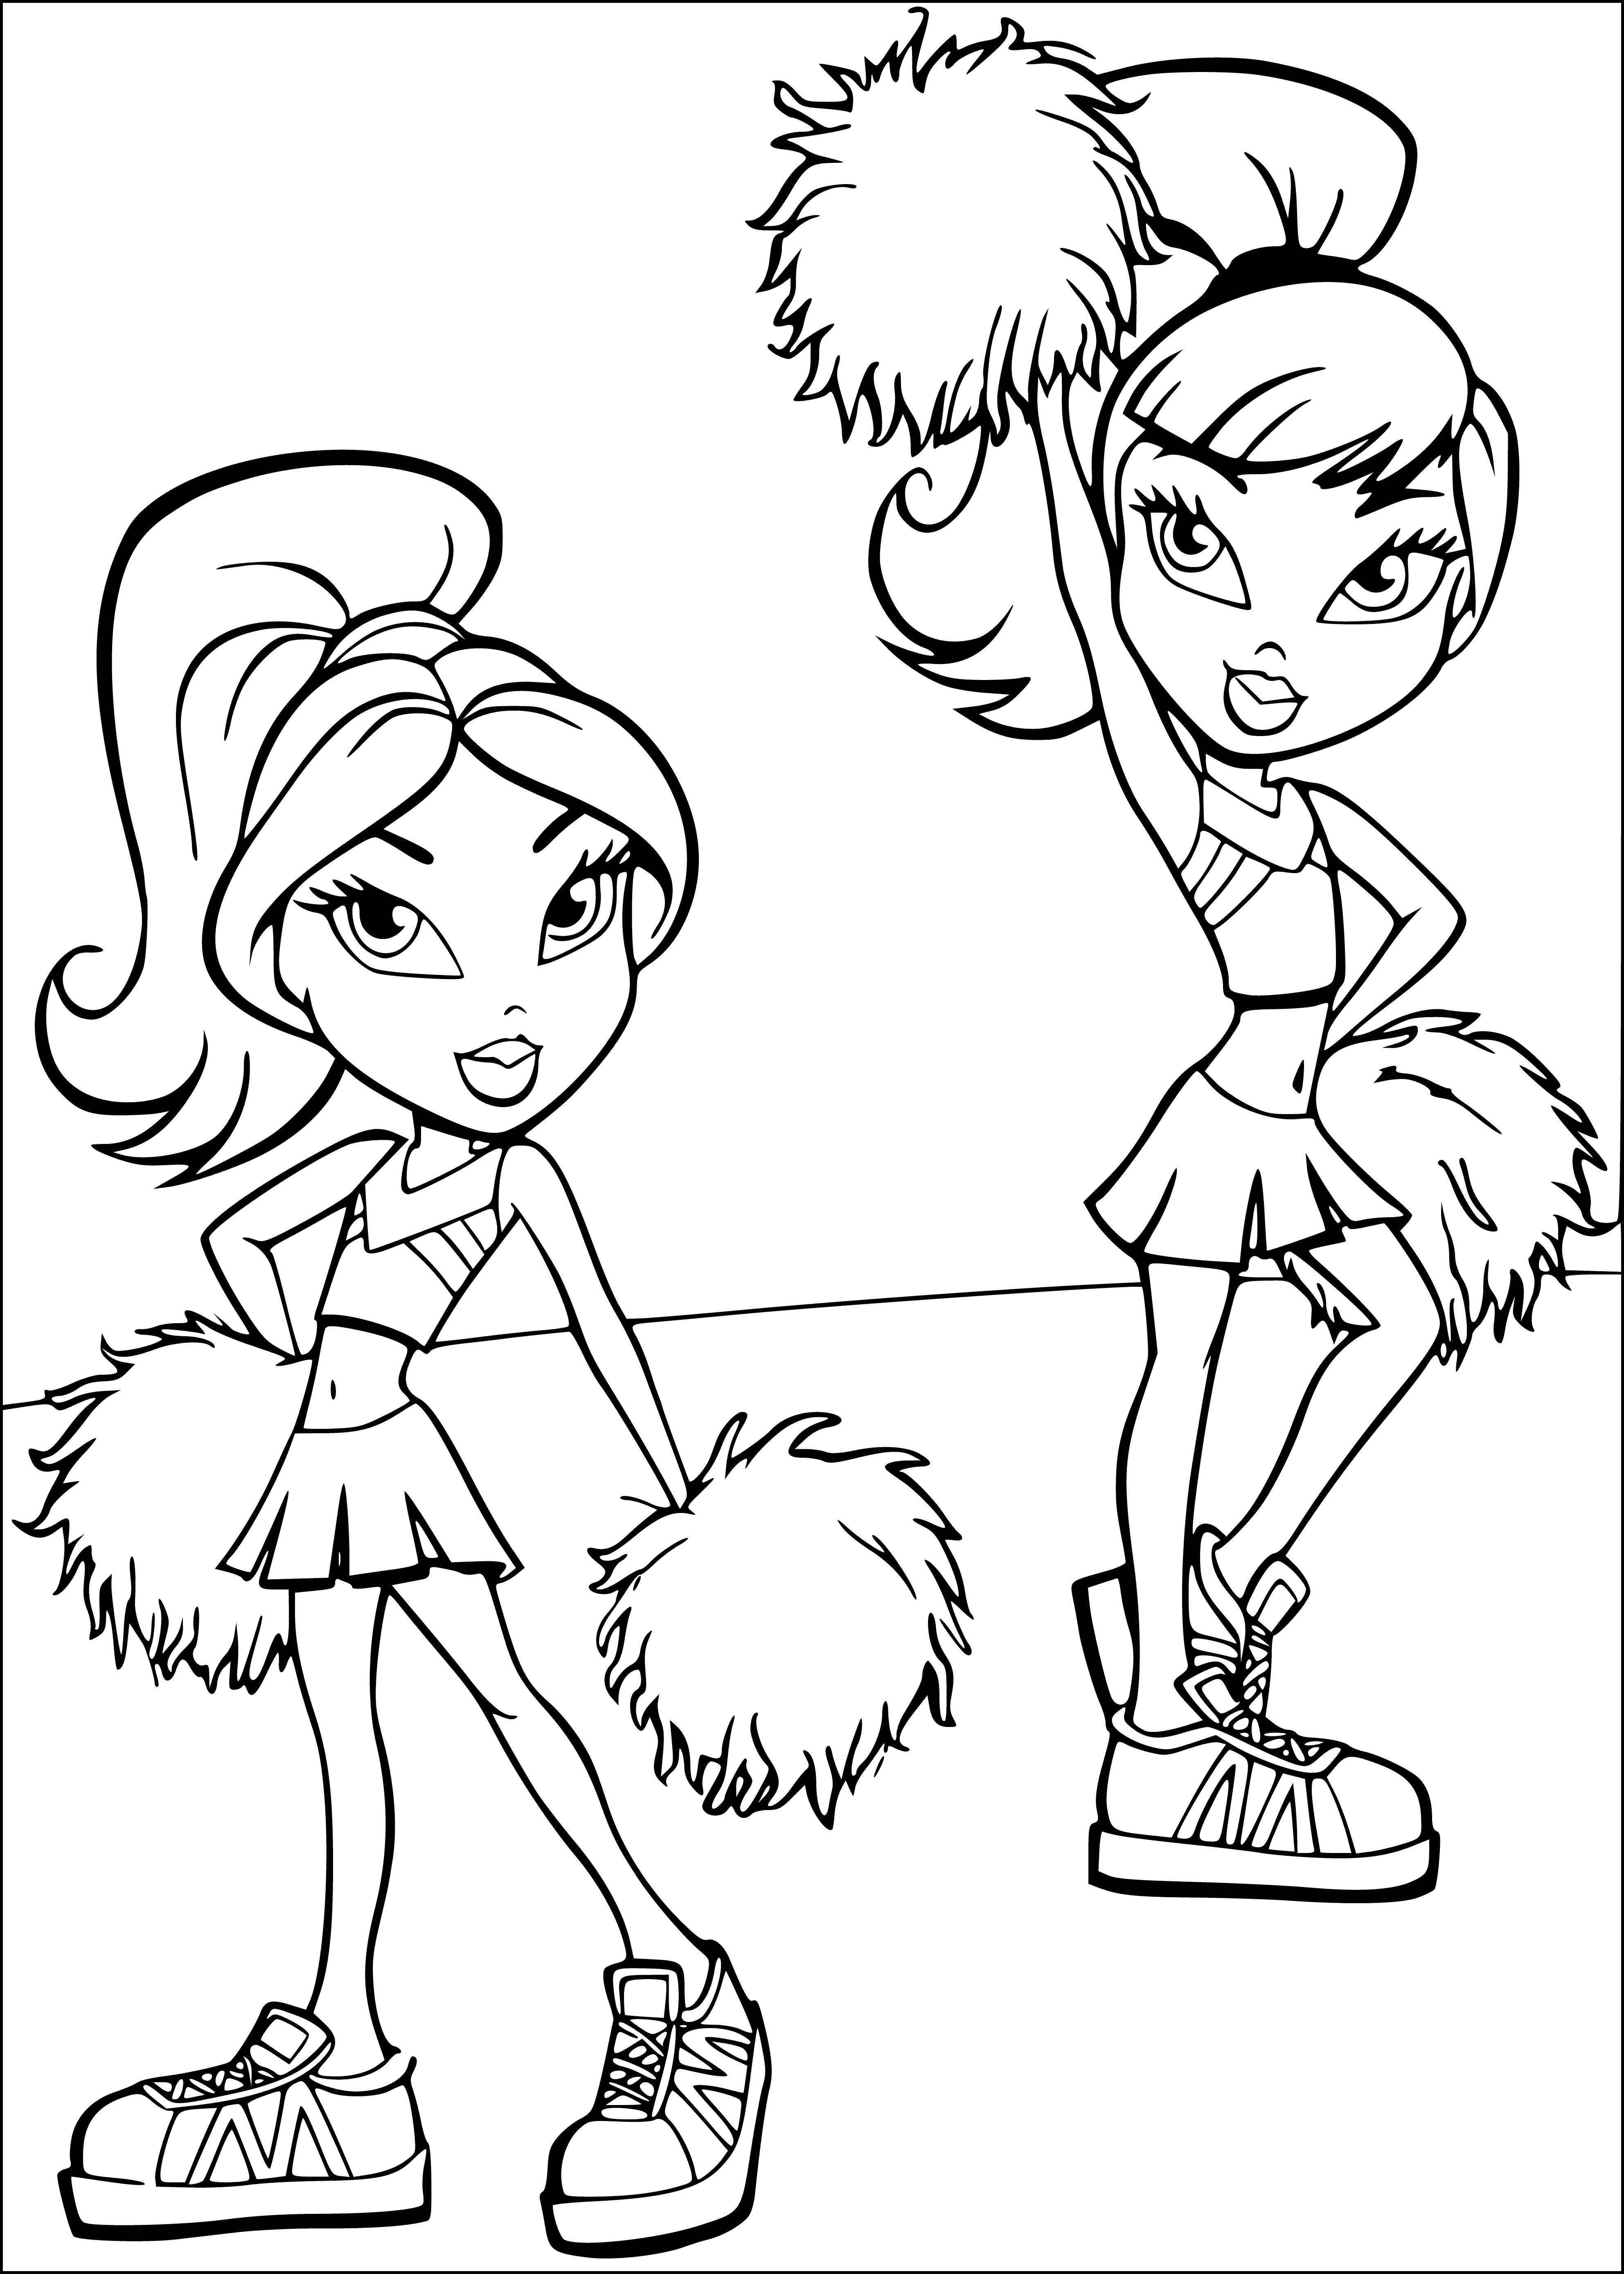 coloring page: 4 girls wearing pink tank tops & shorts in semi-circle around coffee table with pink vase & flowers, pizza & tissues. Except 1 blonde.